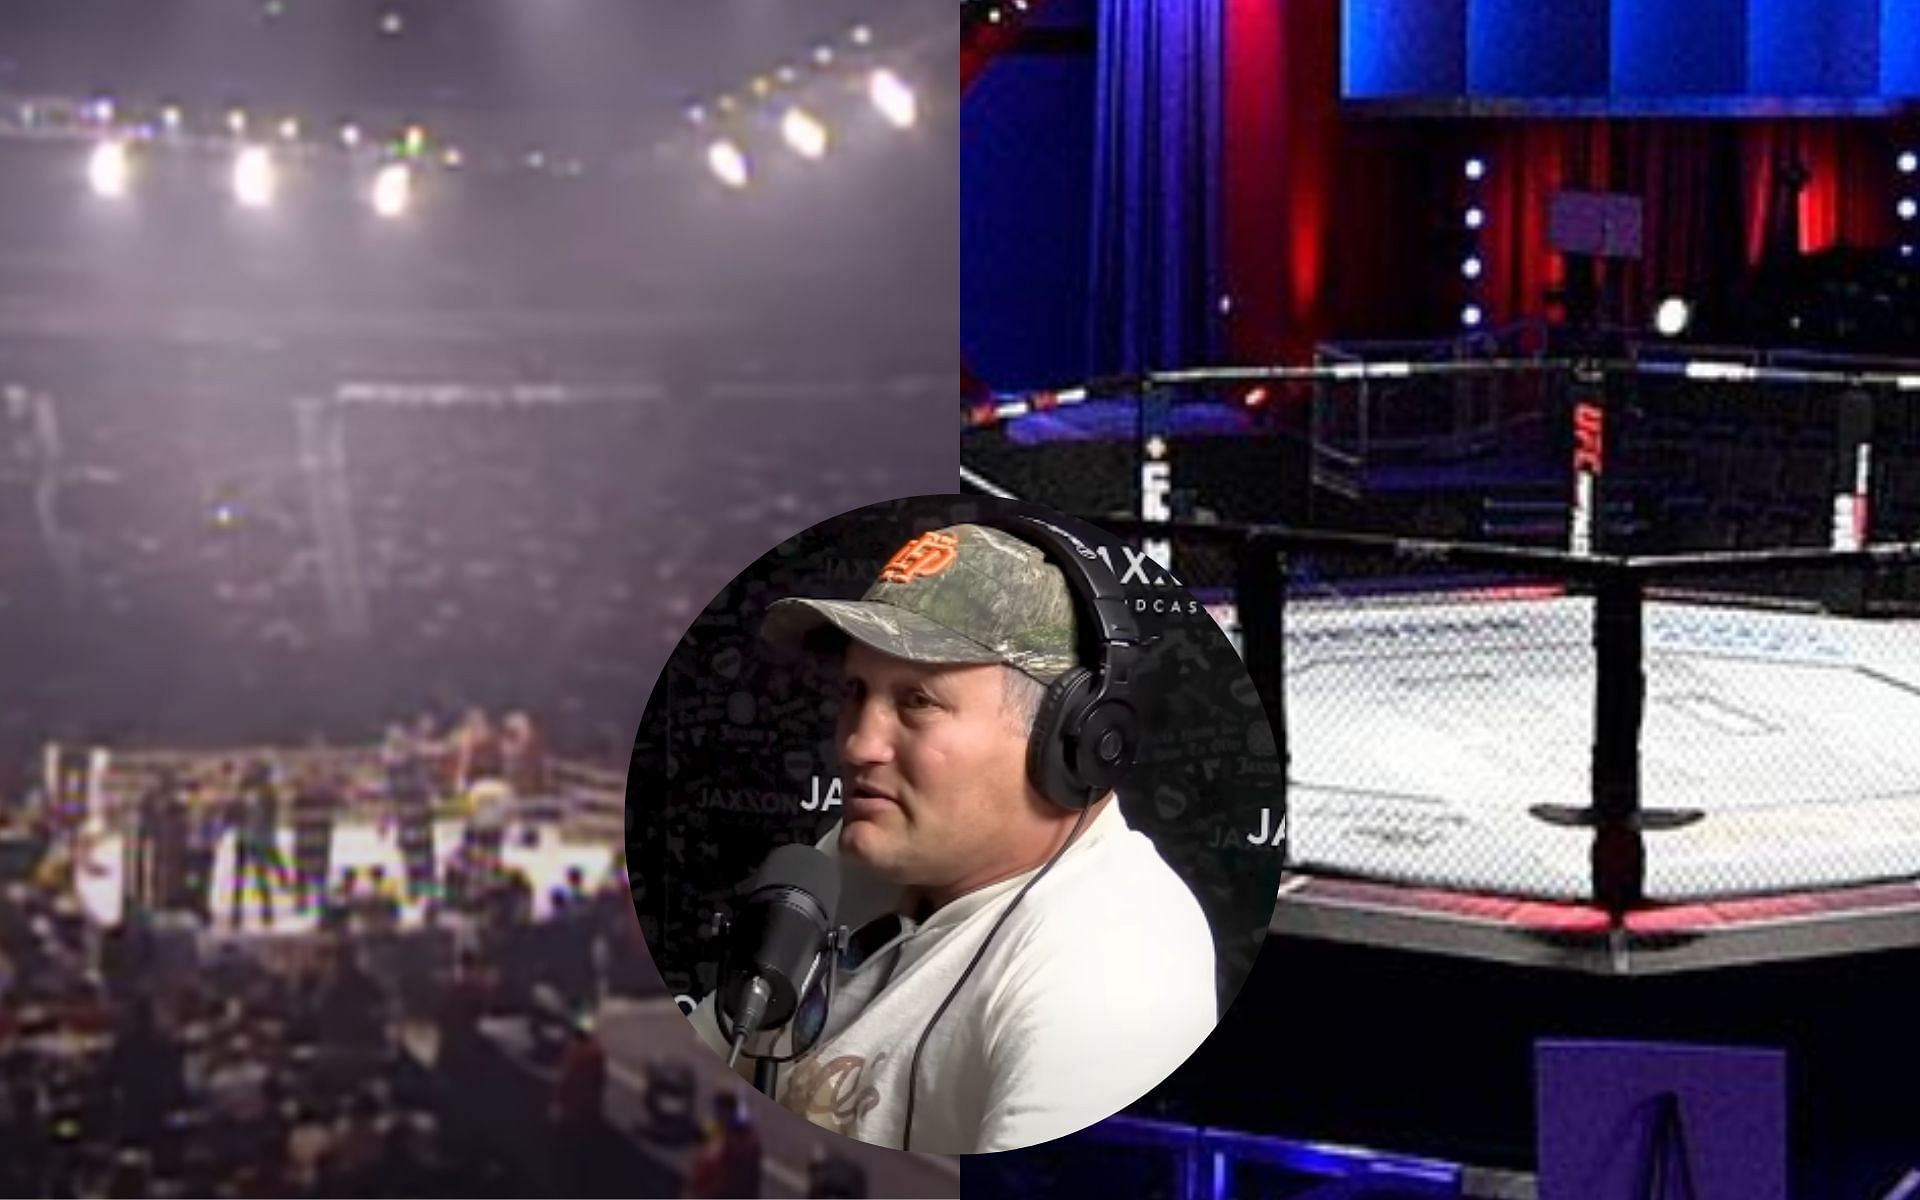 Dan Henderson [Middle] outlines the difference between fighting in the UFC octagon [Right] and Pride ring [Left] [Image courtesy: Jaxxon Podcast and UFC Fight Pass - YouTube, and @danawhite - X]